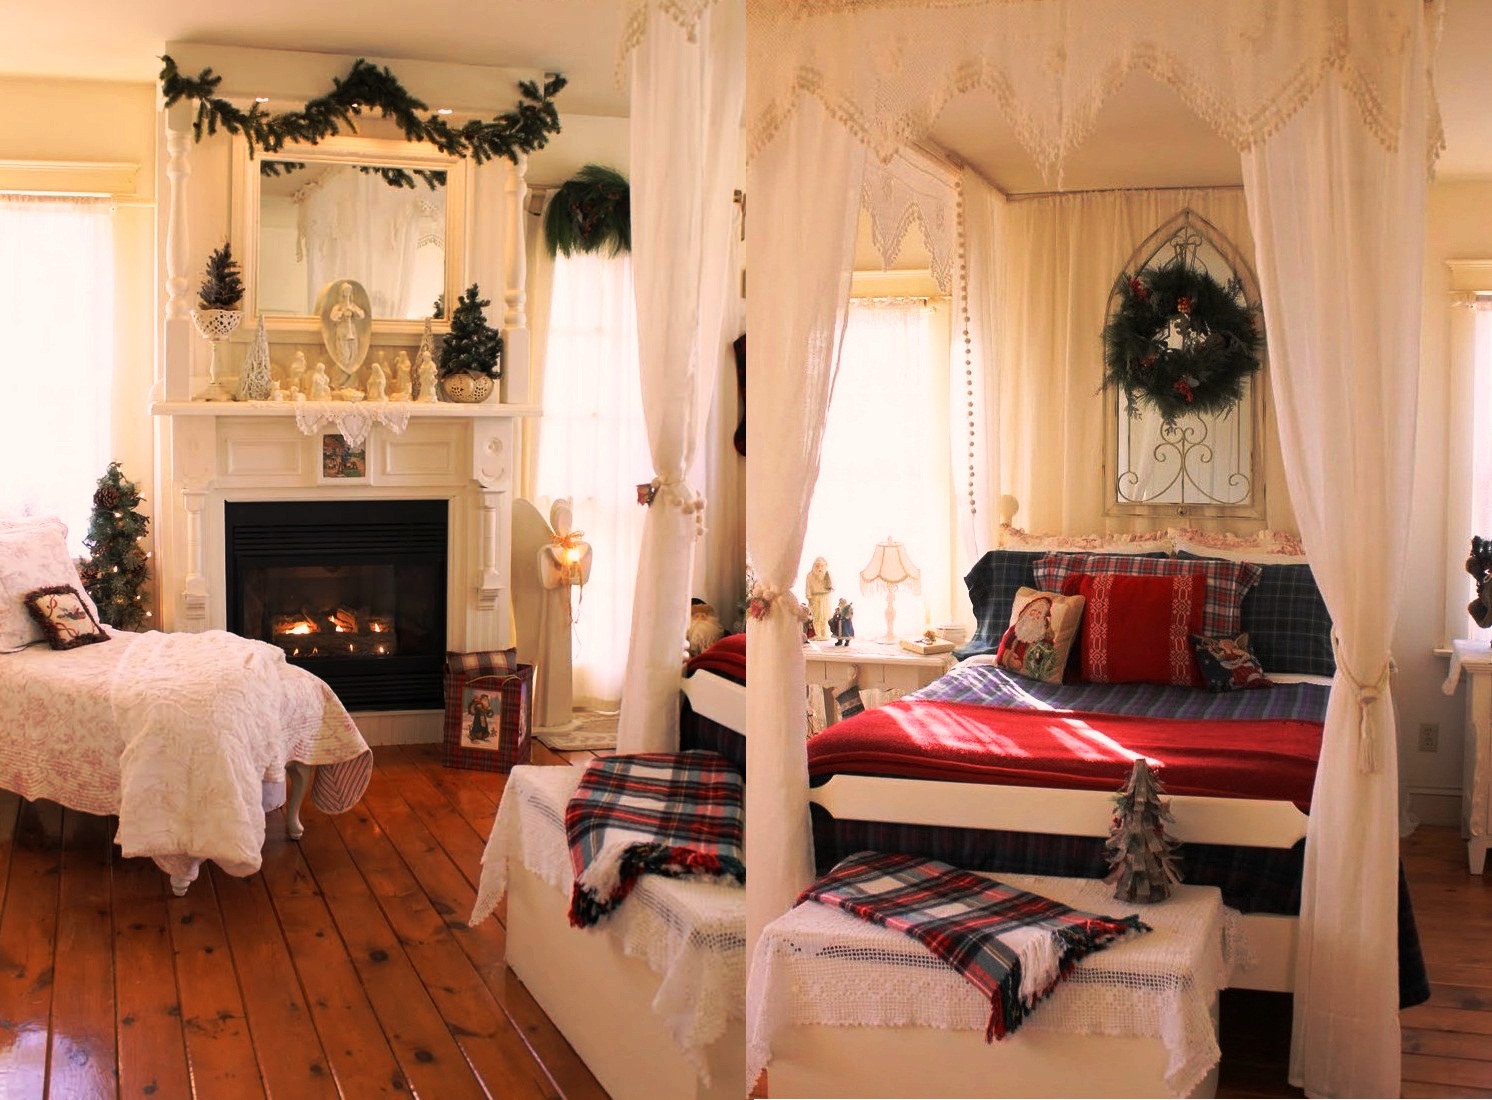 Cute Ways To Decorate Your Bedroom For Christmas